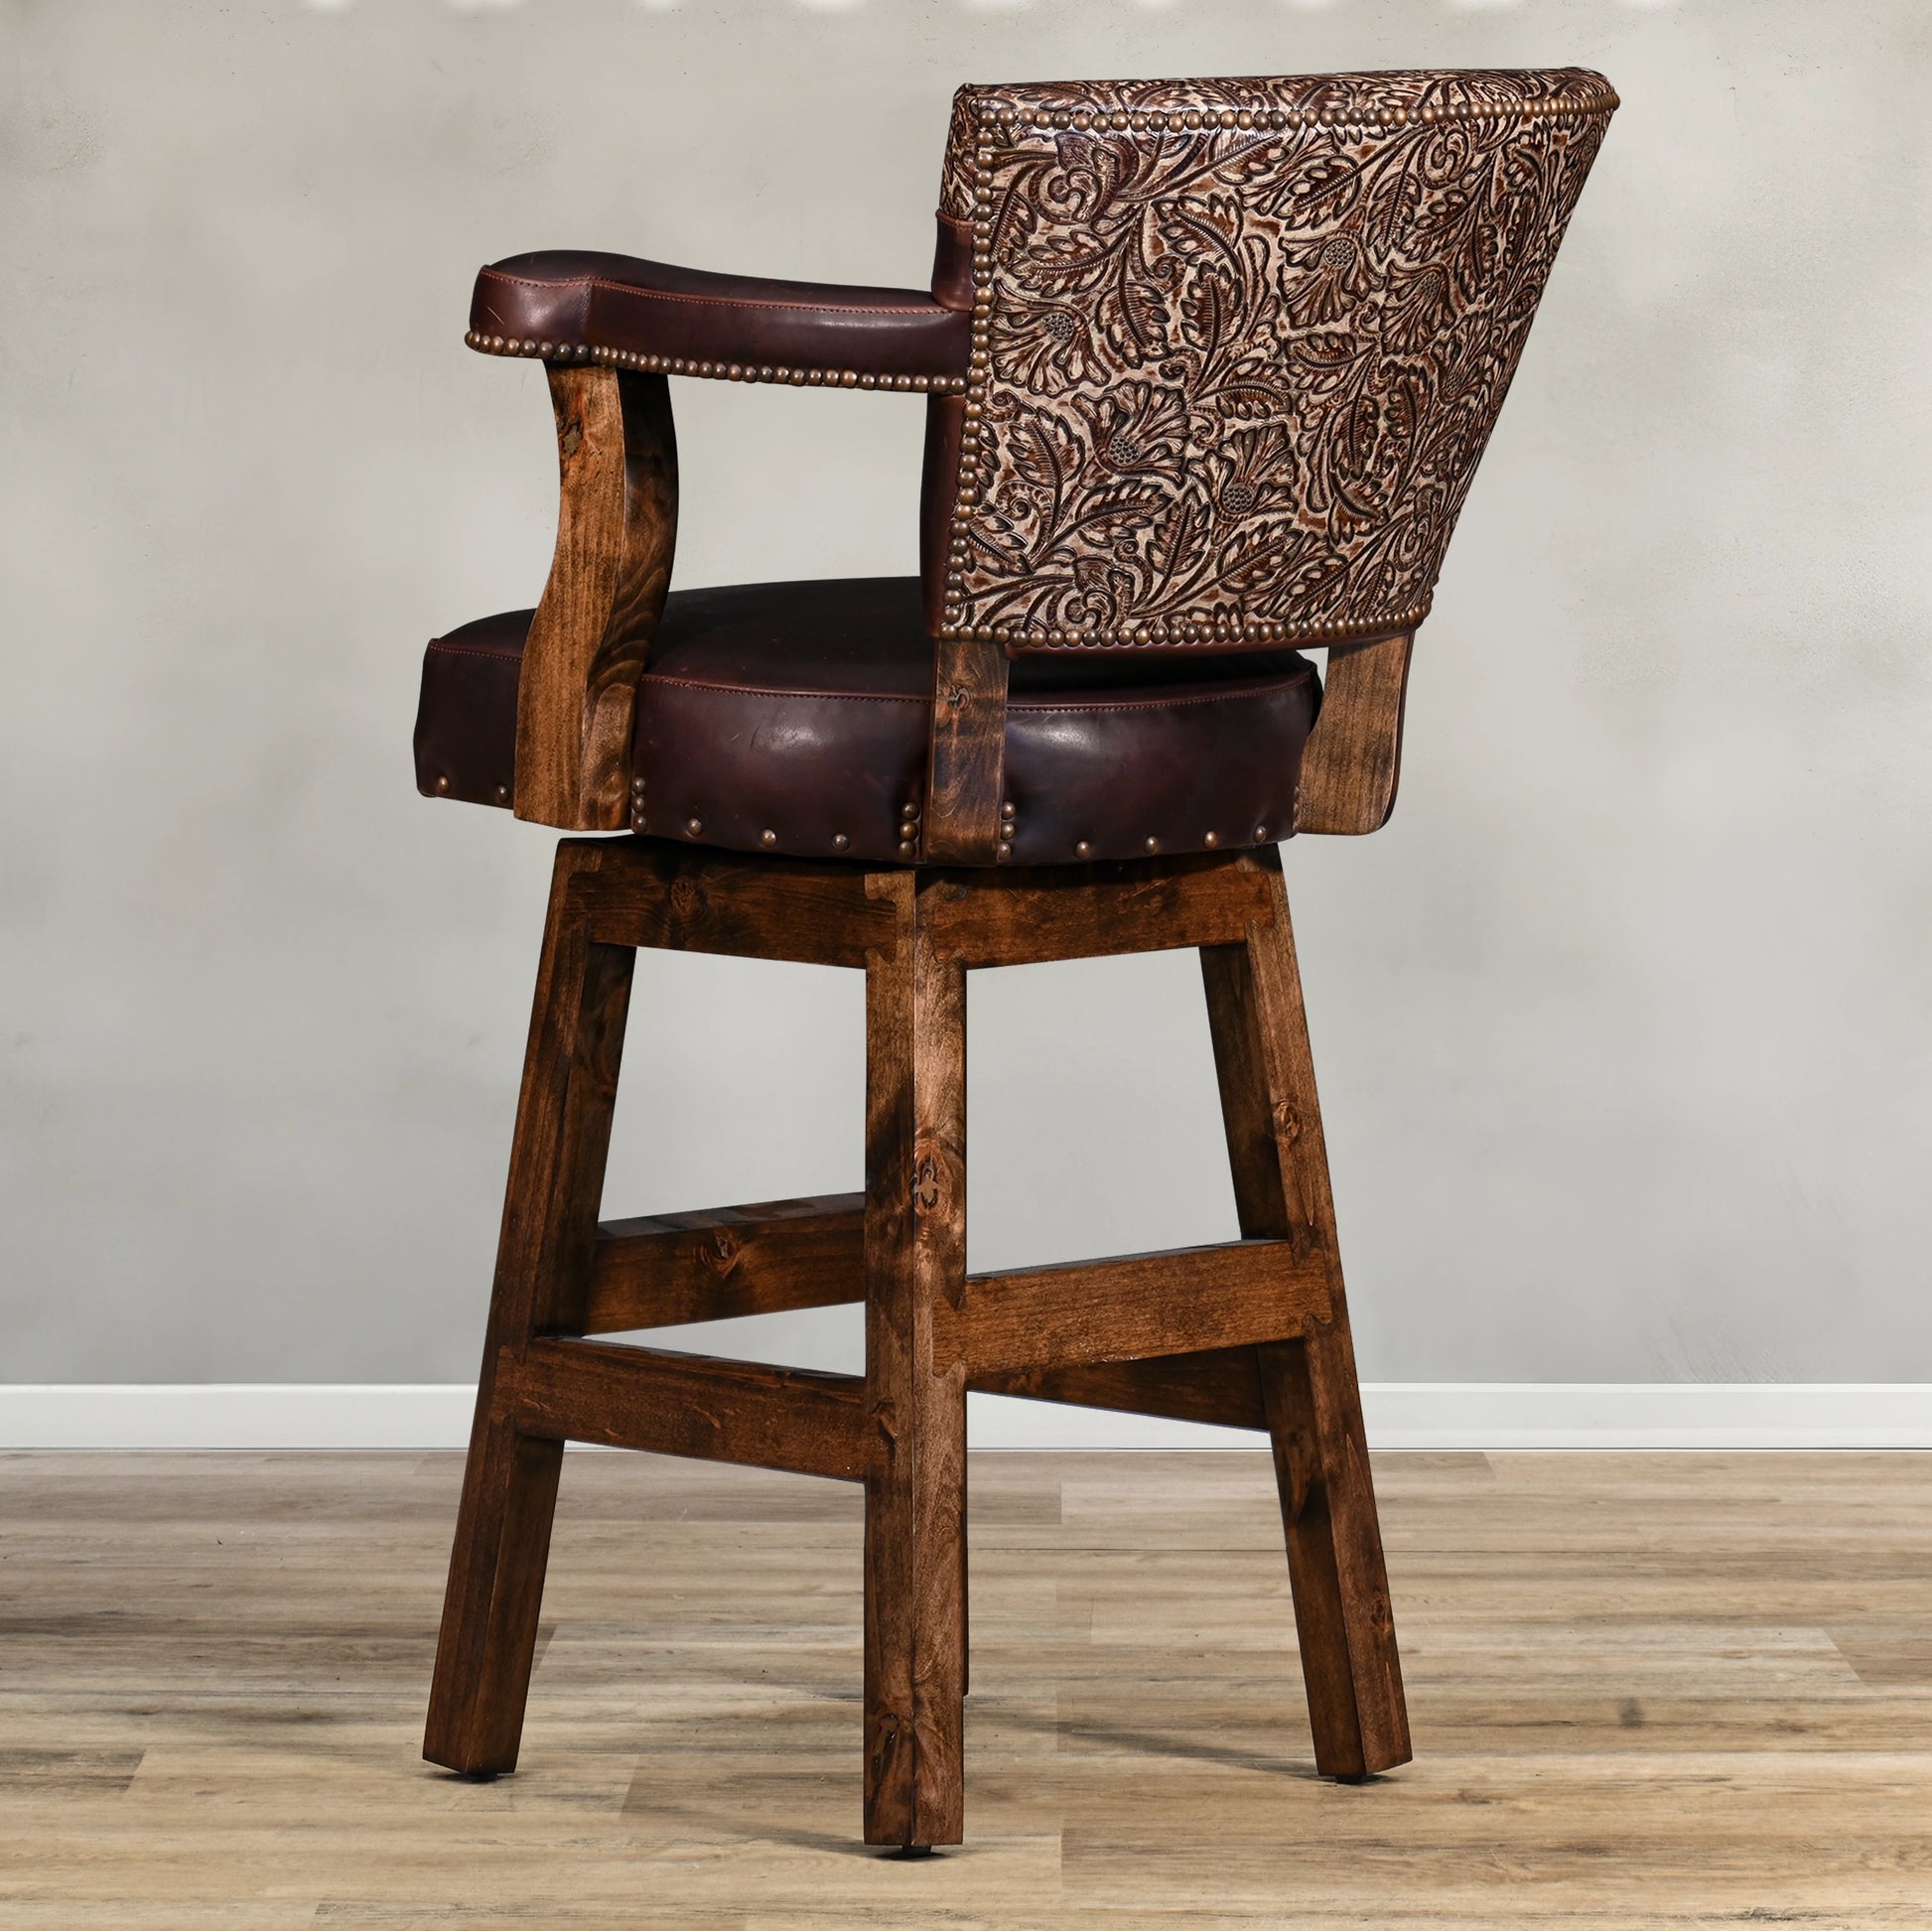 Experience rustic elegance with the Autumn Yoke Chisum Barstool. Its autumn tooled leather yoke and 100% top grain leather add a touch of sophistication, while the swivel feature offers convenience. Perfect for any bar or kitchen, this barstool combines style and function seamlessly.